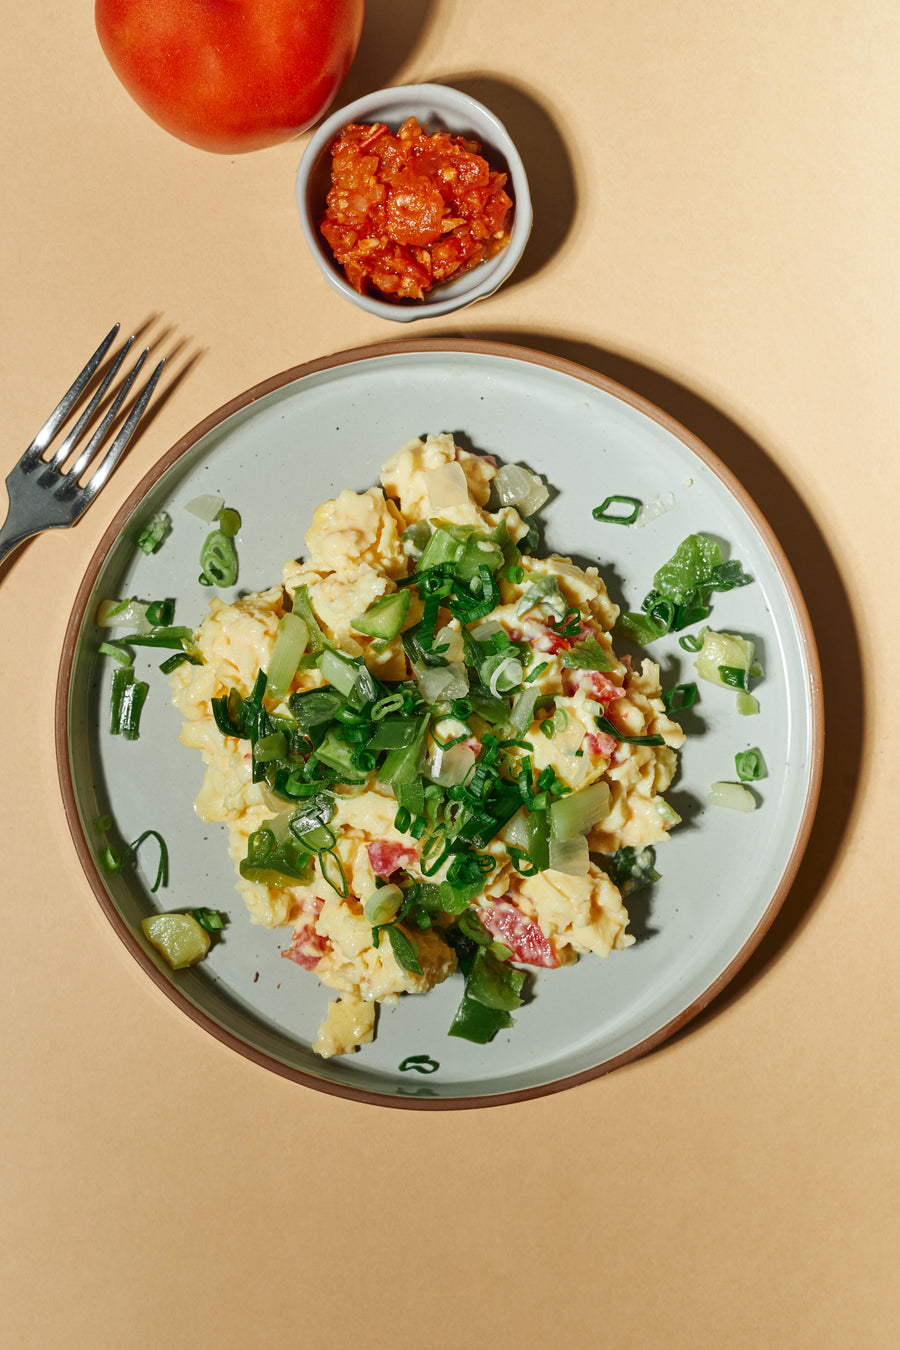 Farmer's Market Scrambled Eggs with Roasted Spring Vegetables, Cheddar Cheese, Tomato Chutney